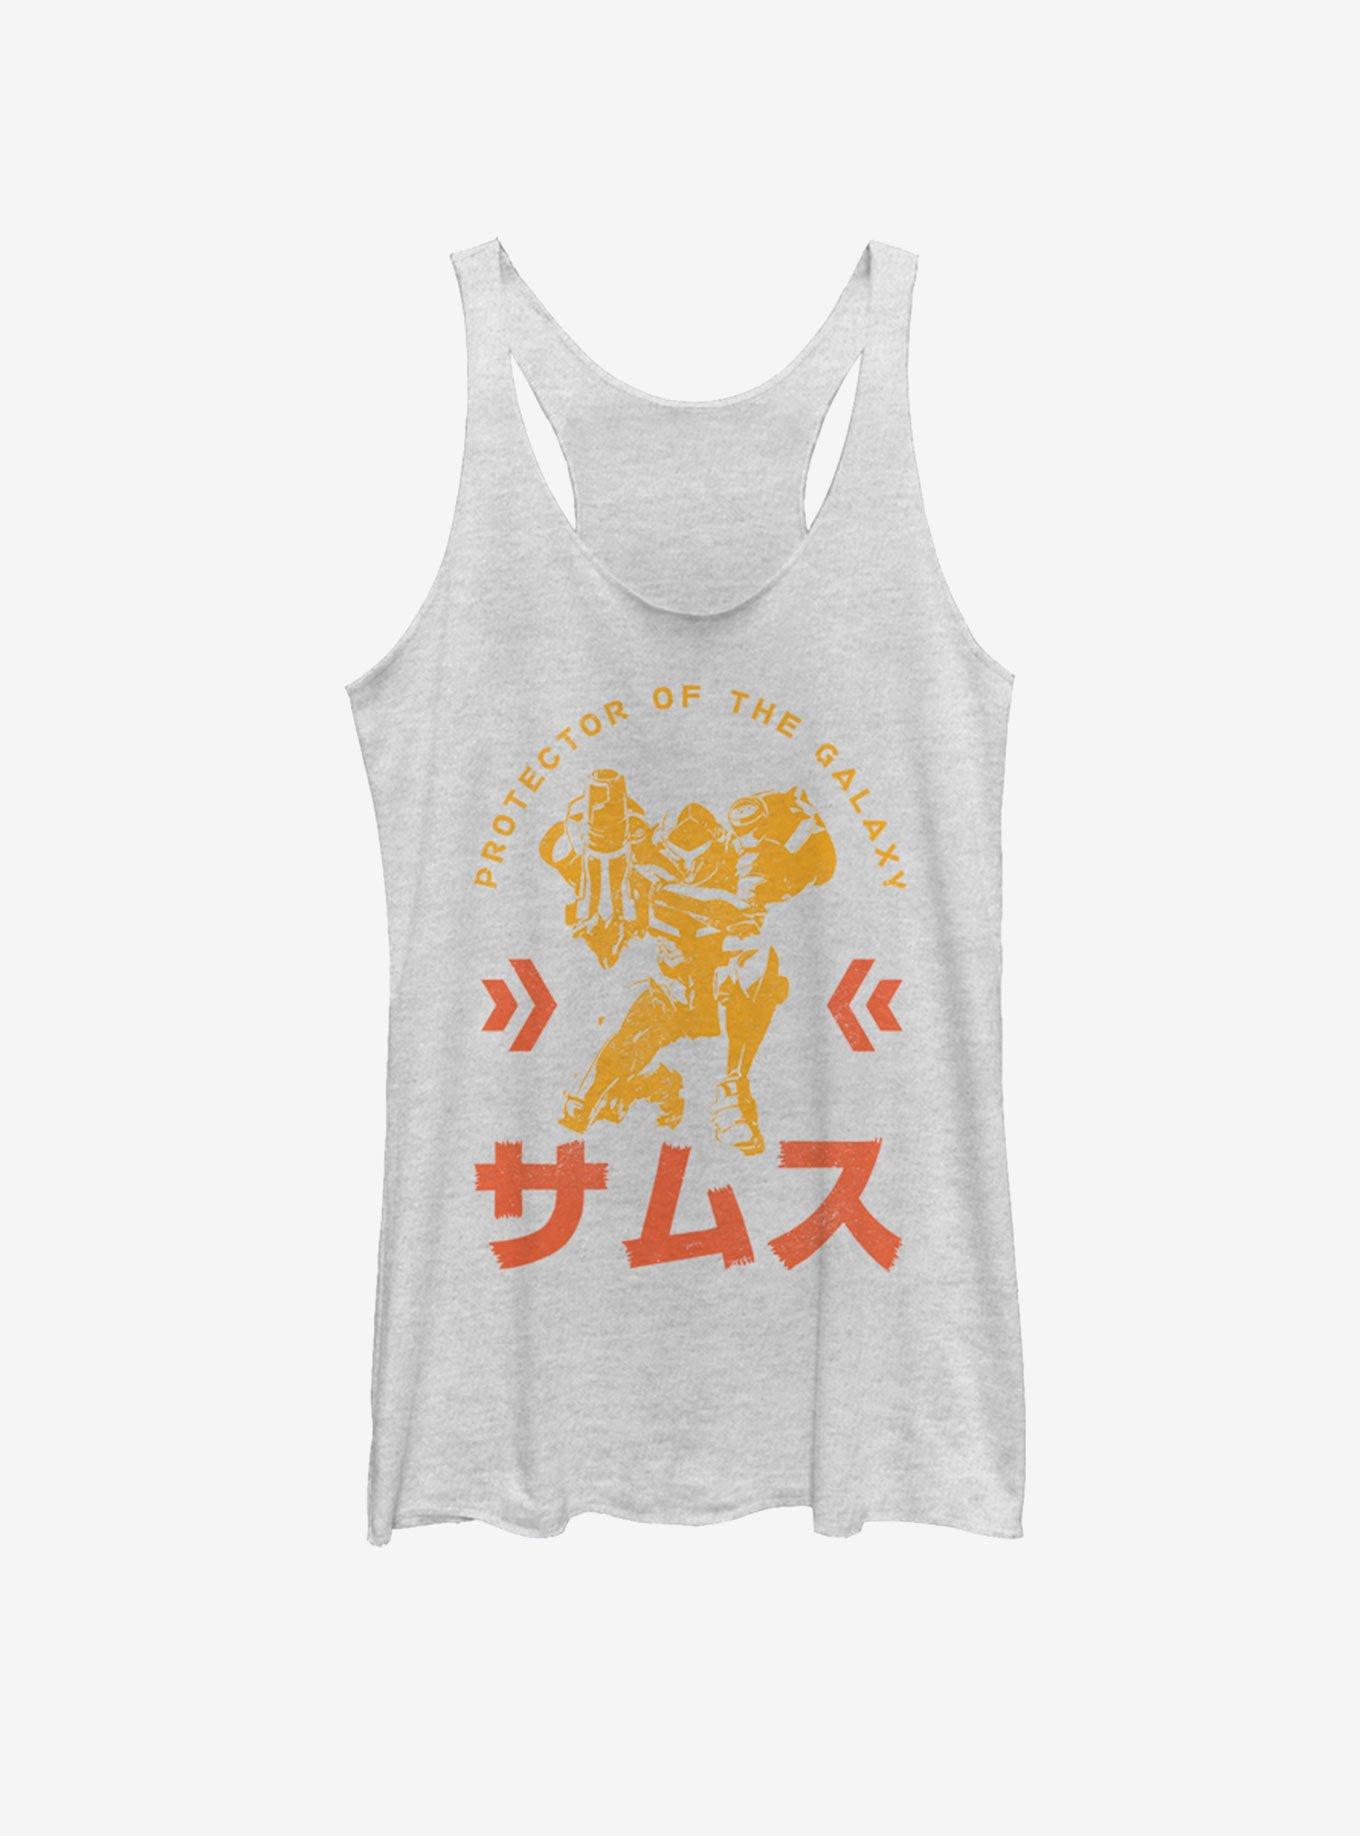 Nintendo Protector Of The Galaxy Girls Tank, WHITE HTR, hi-res